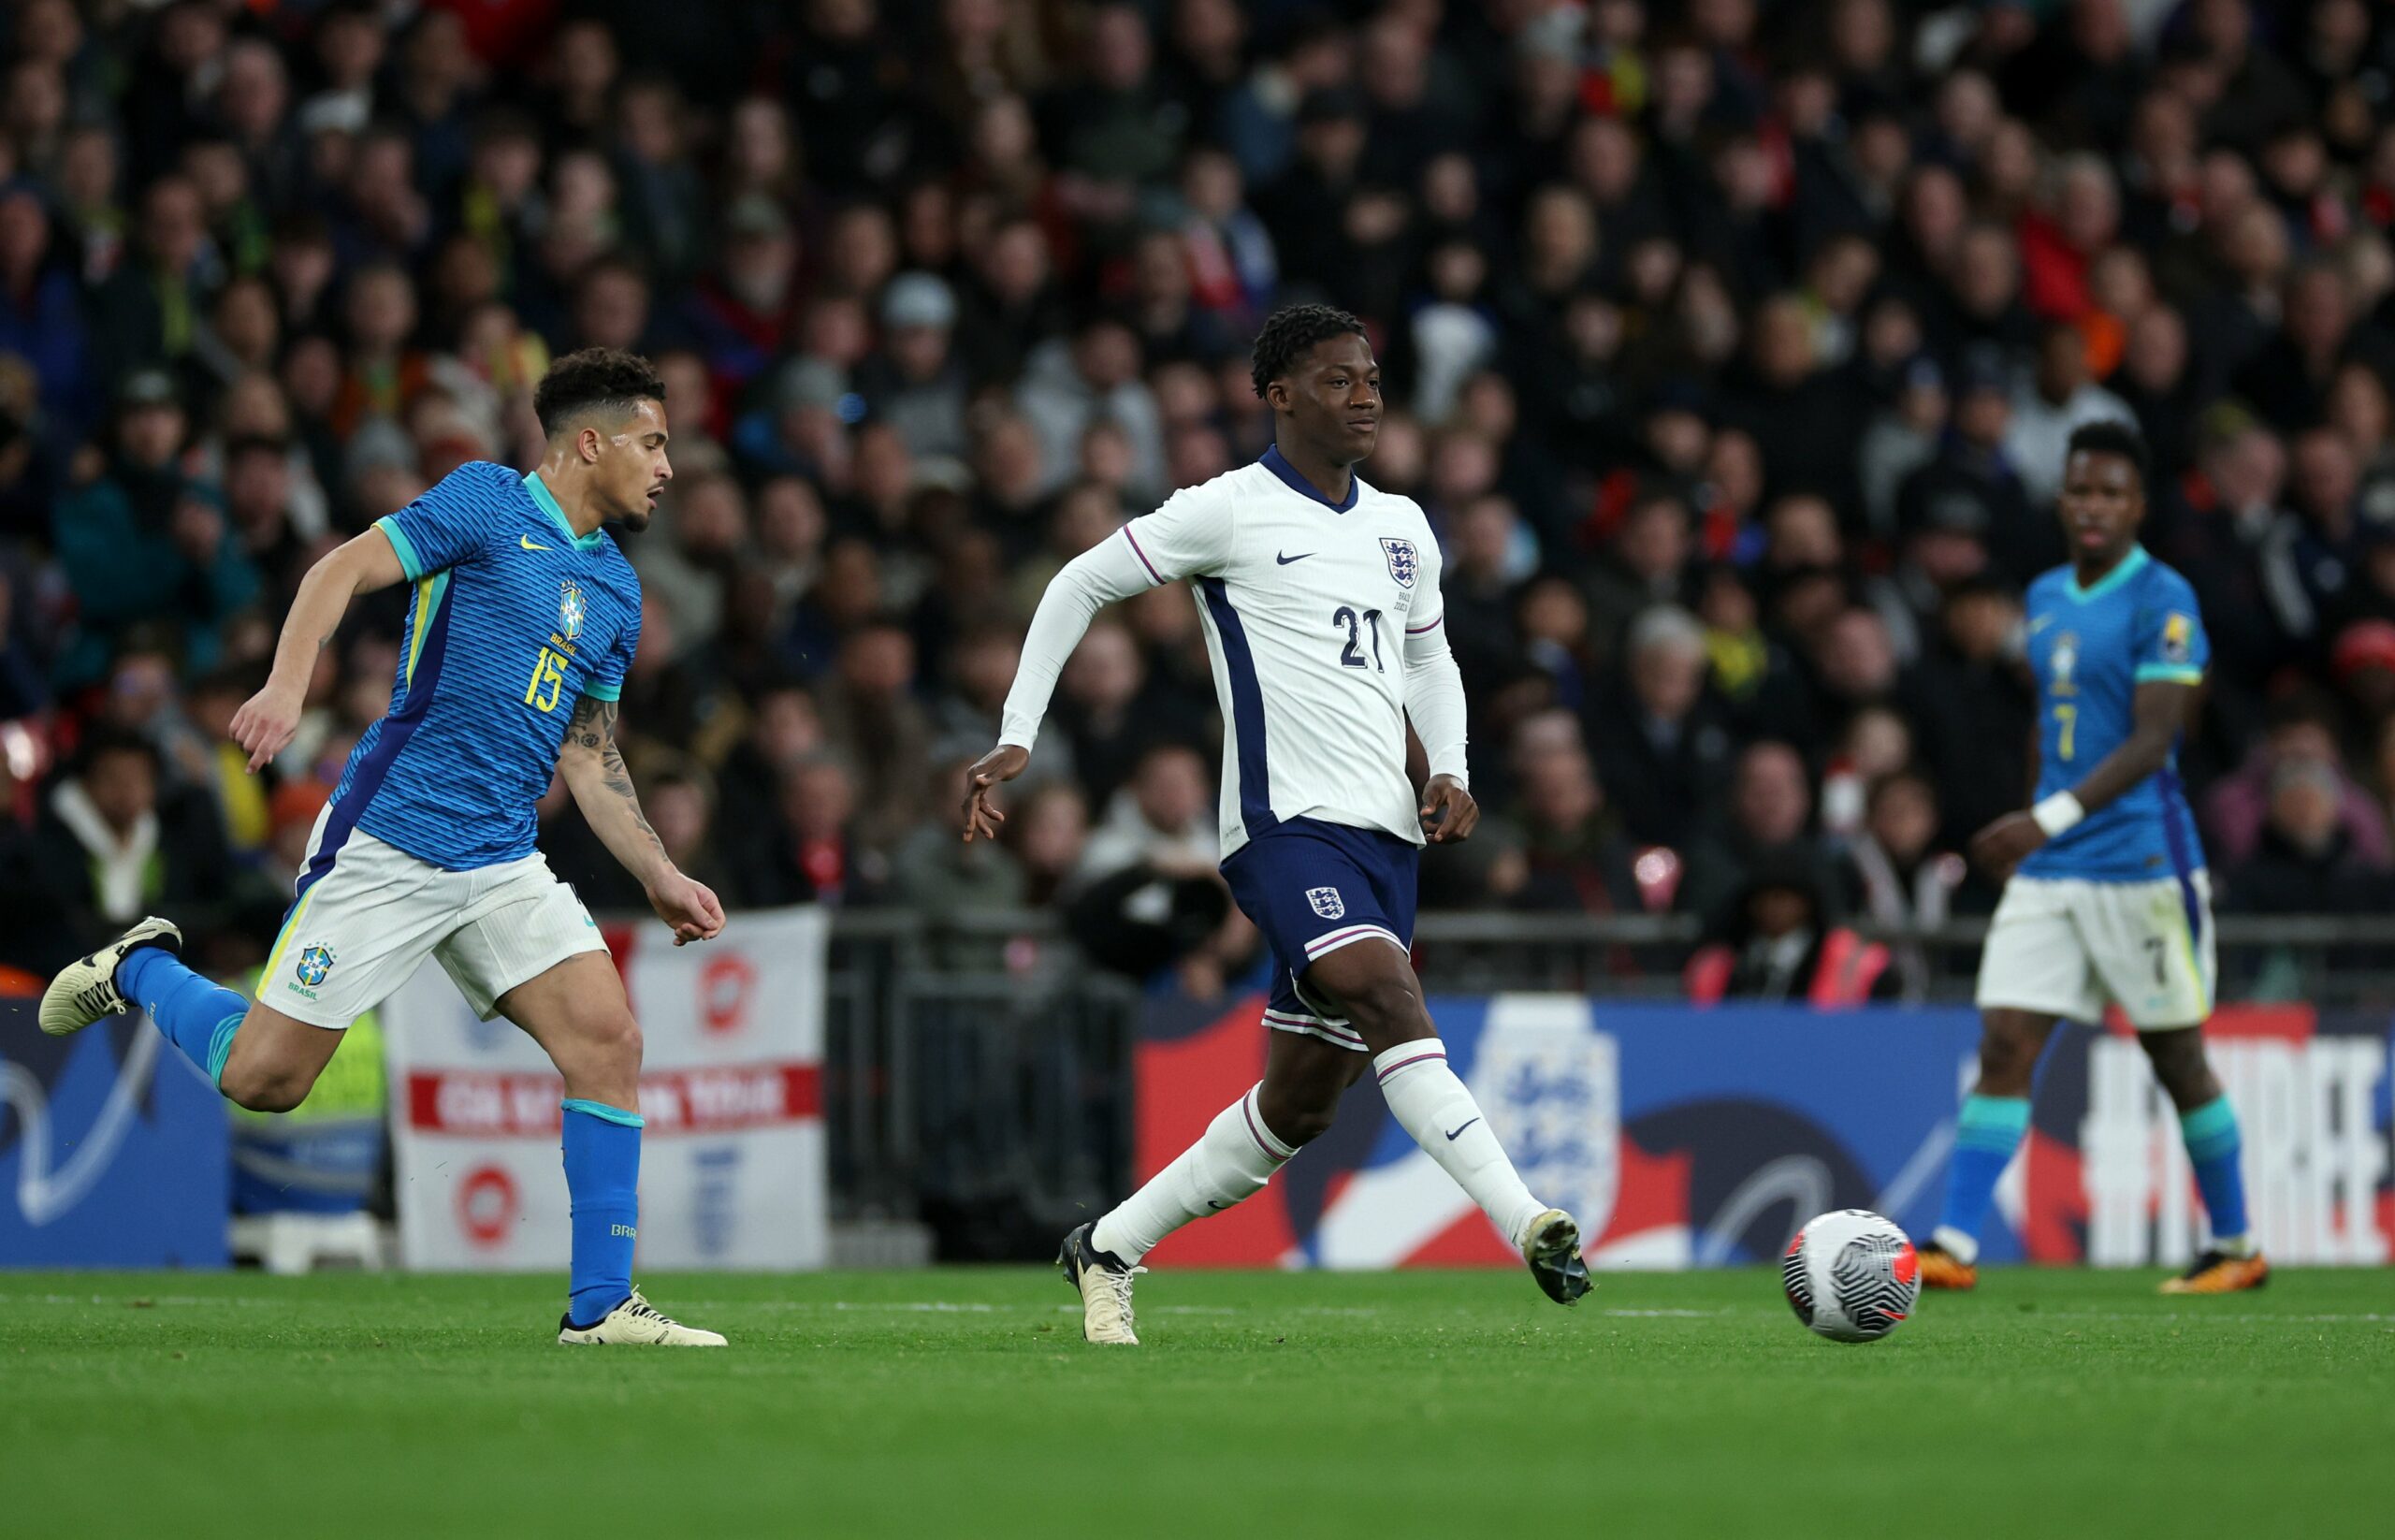 Hopes of playing for Ghana fading after Kobbie Mainoo makes England debut against Brazil